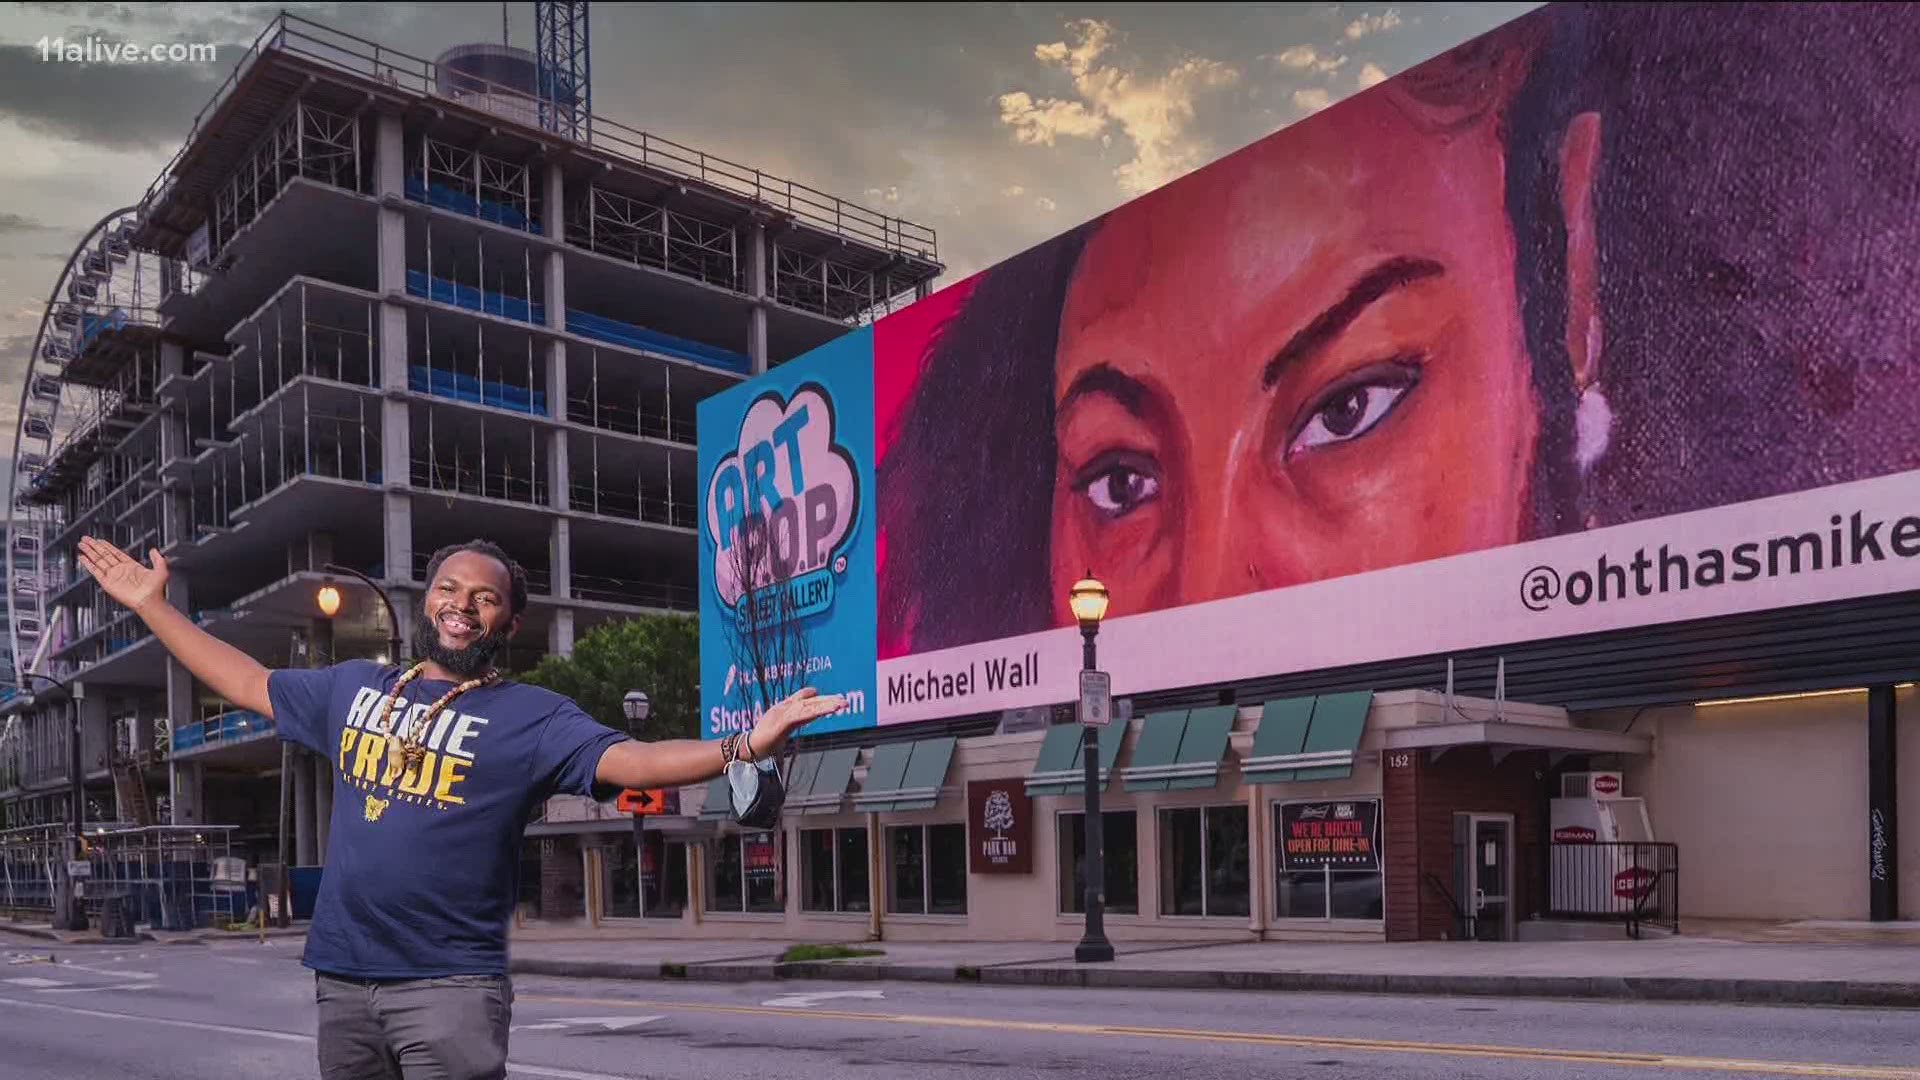 A MARTA bus driver wins contest to have artwork featured on several Atlanta billboards